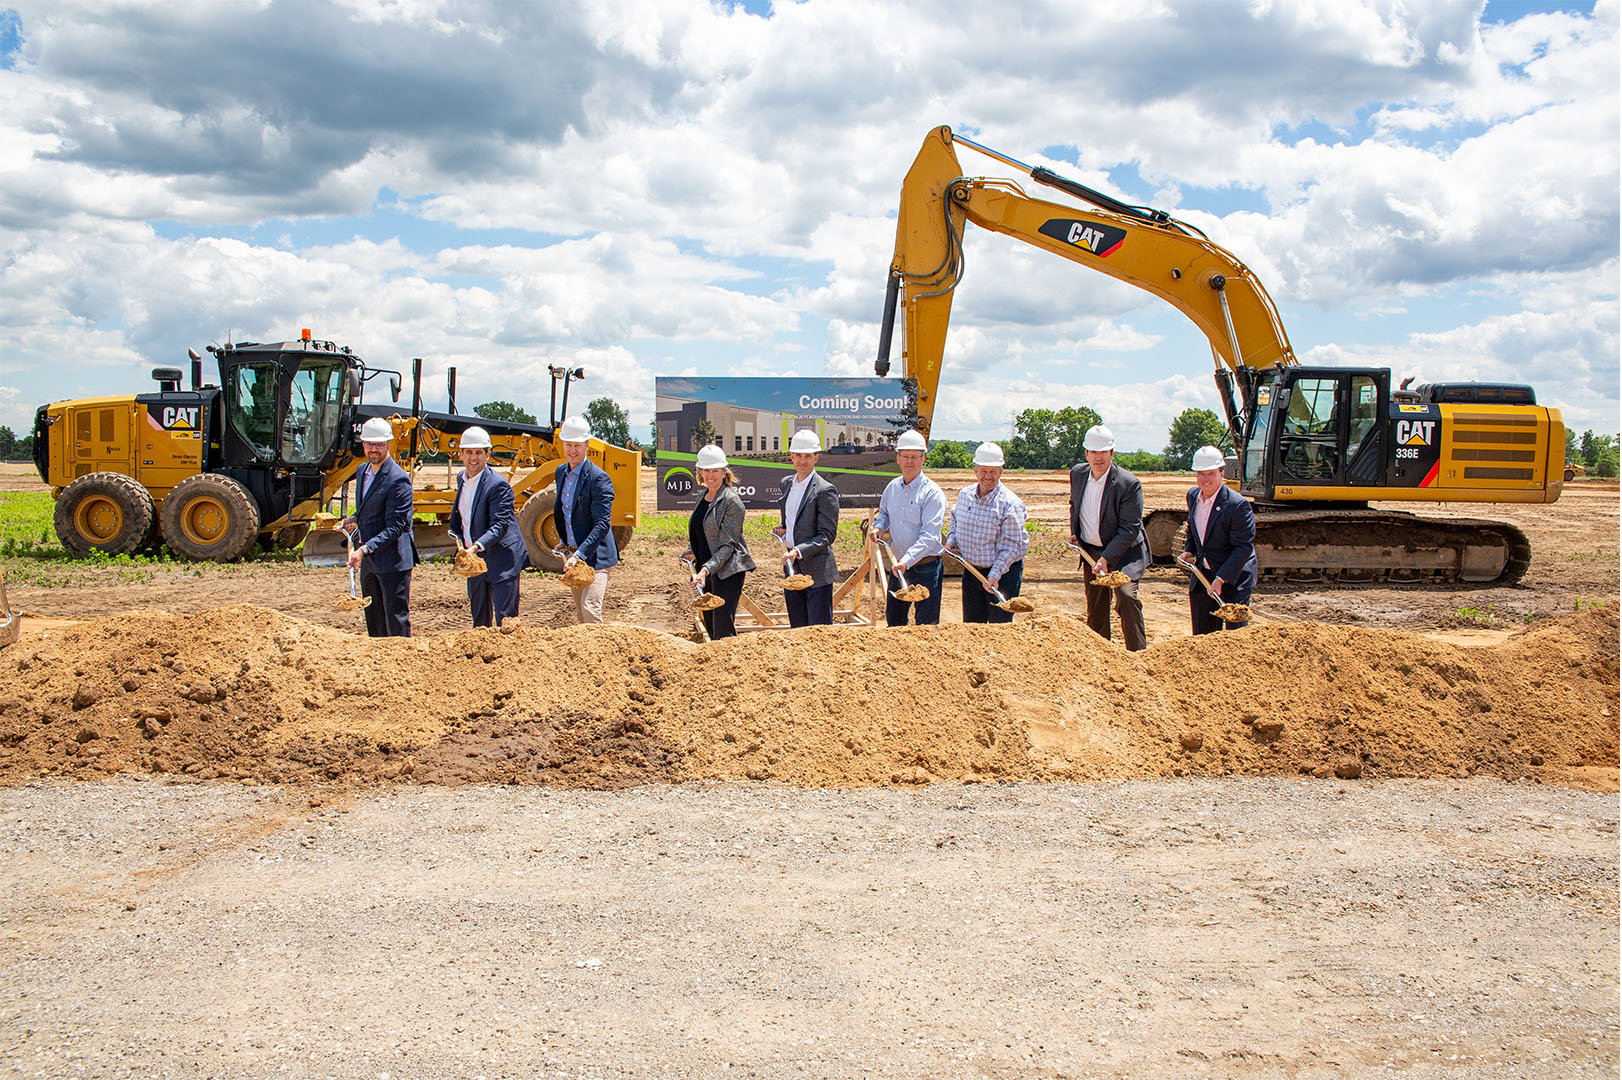 ARCO Breaks Ground on 500,000 Square Foot Production & Distribution Facility for MJB Wood Group